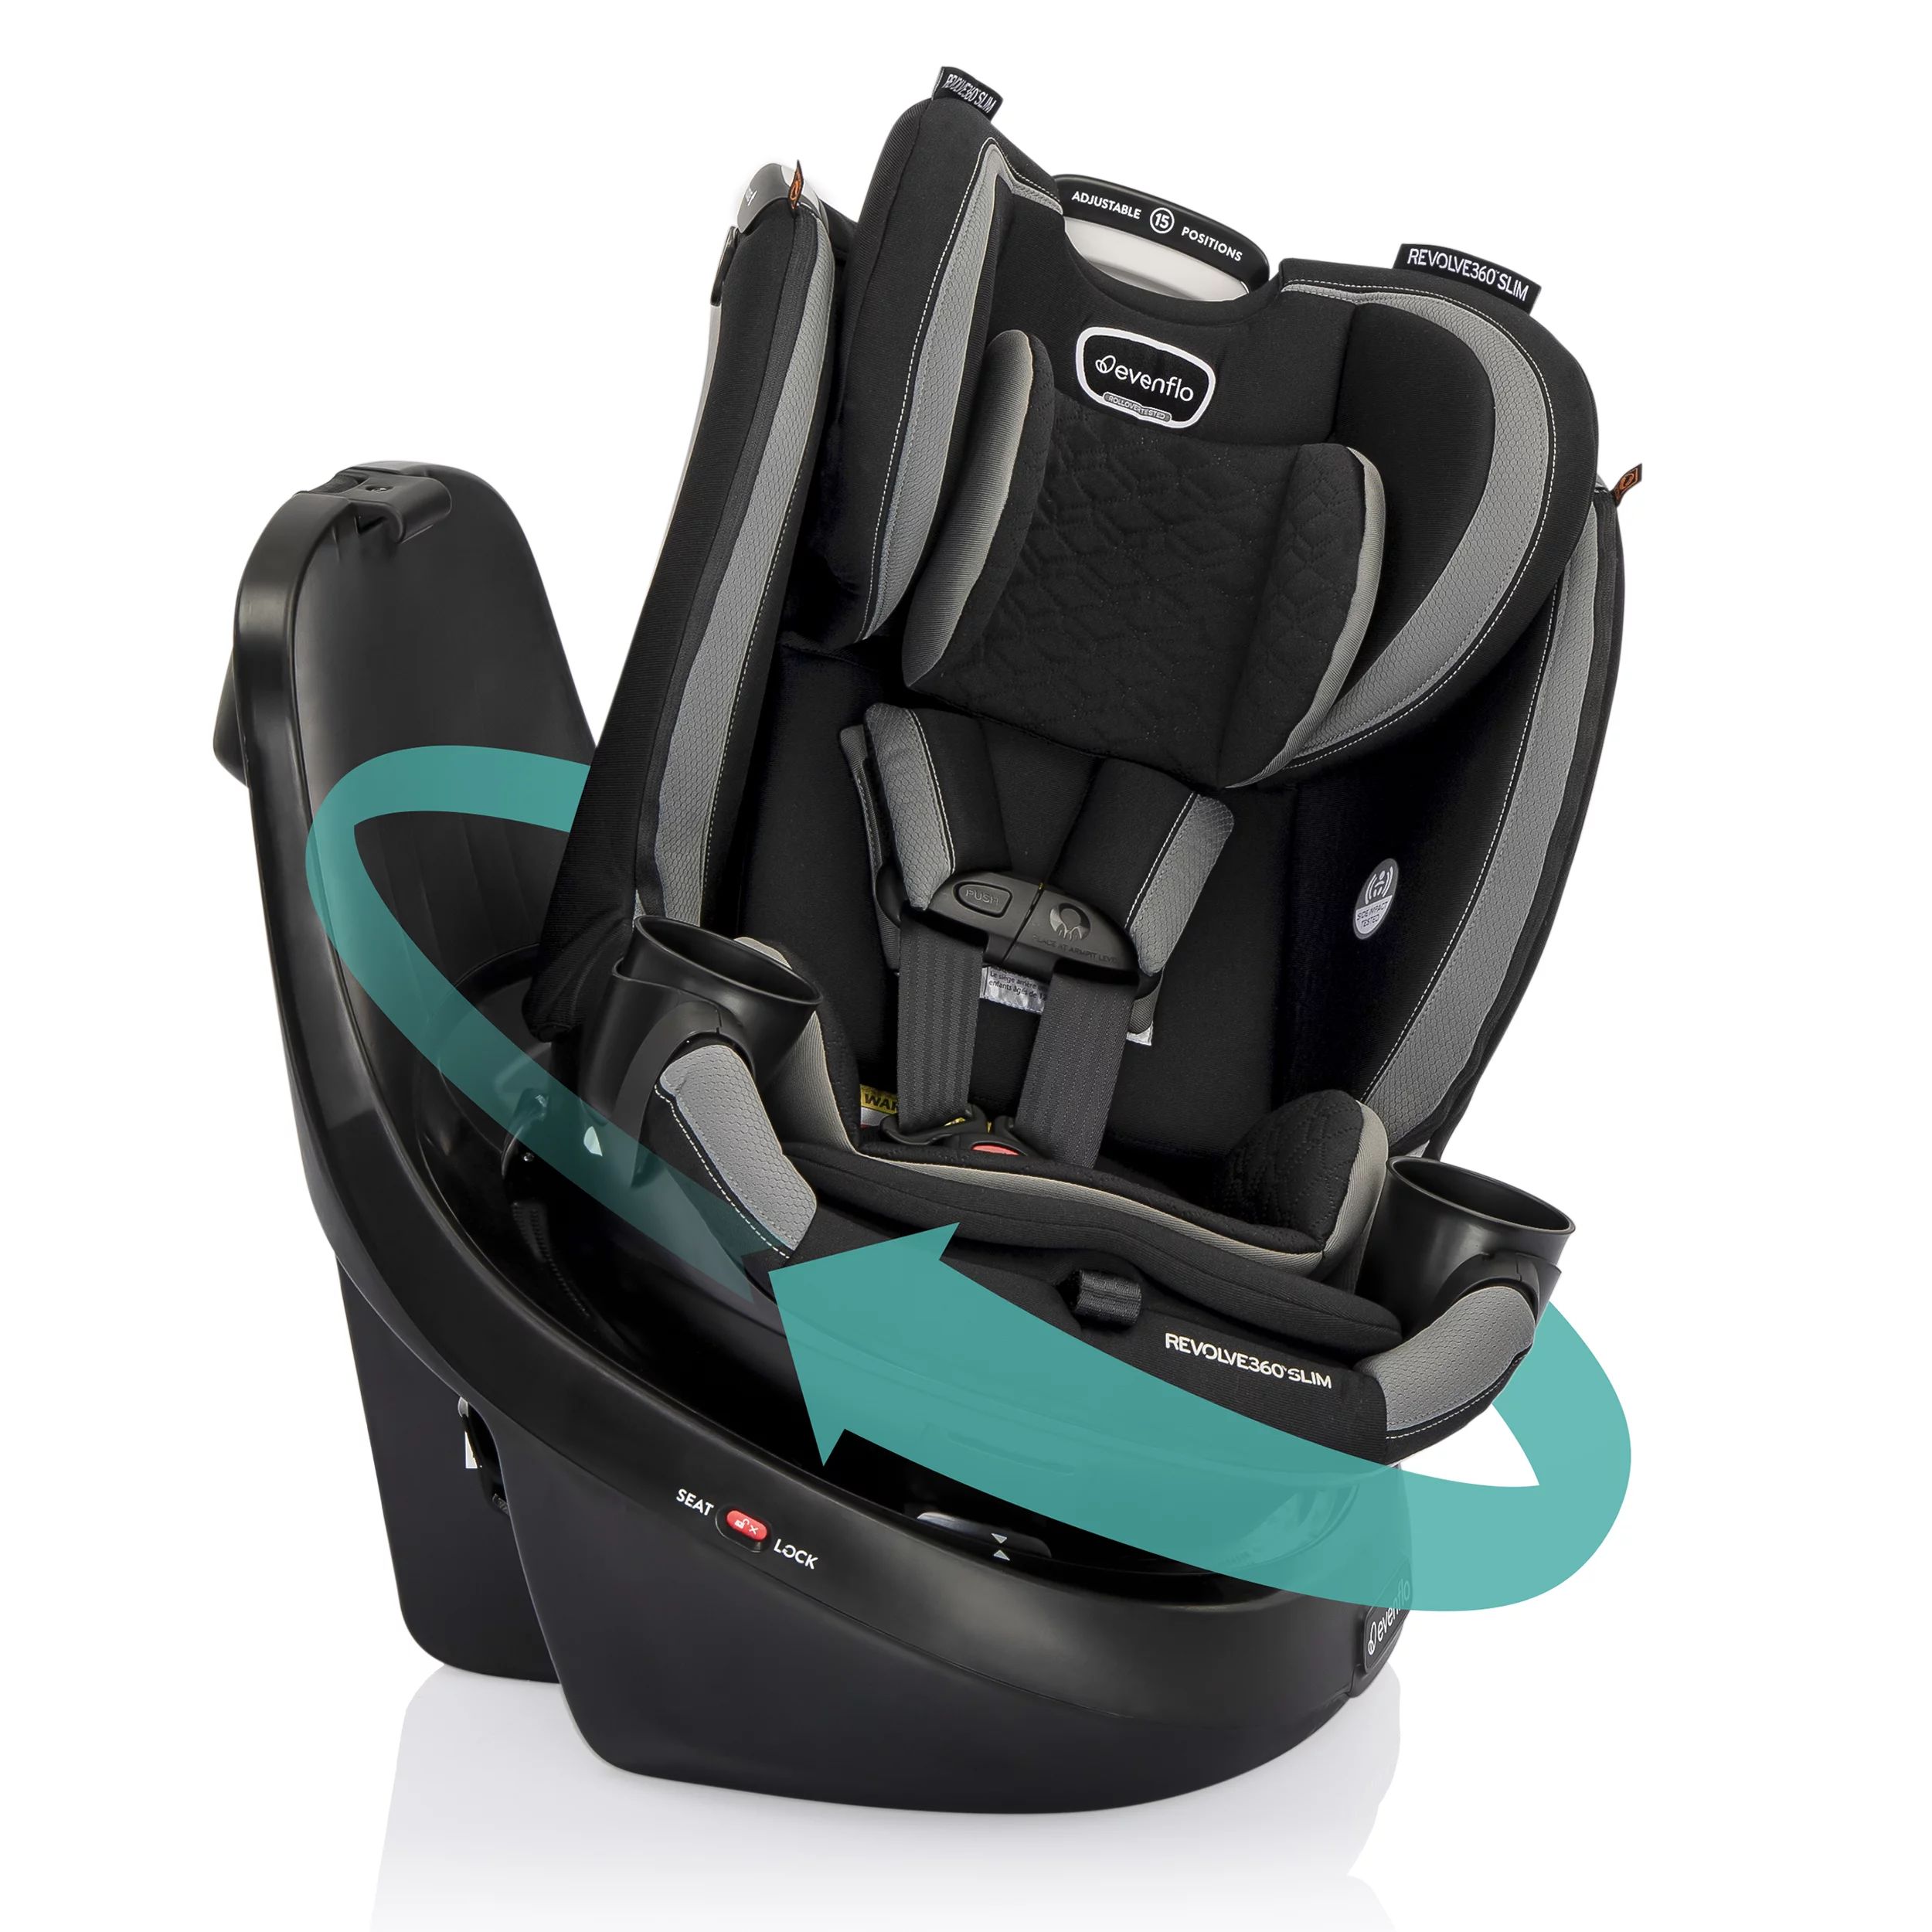 Revolve360 Slim 2-in-1 Rotational Car Seat with Quick Clean Cover (Salem Black) | Walmart (US)